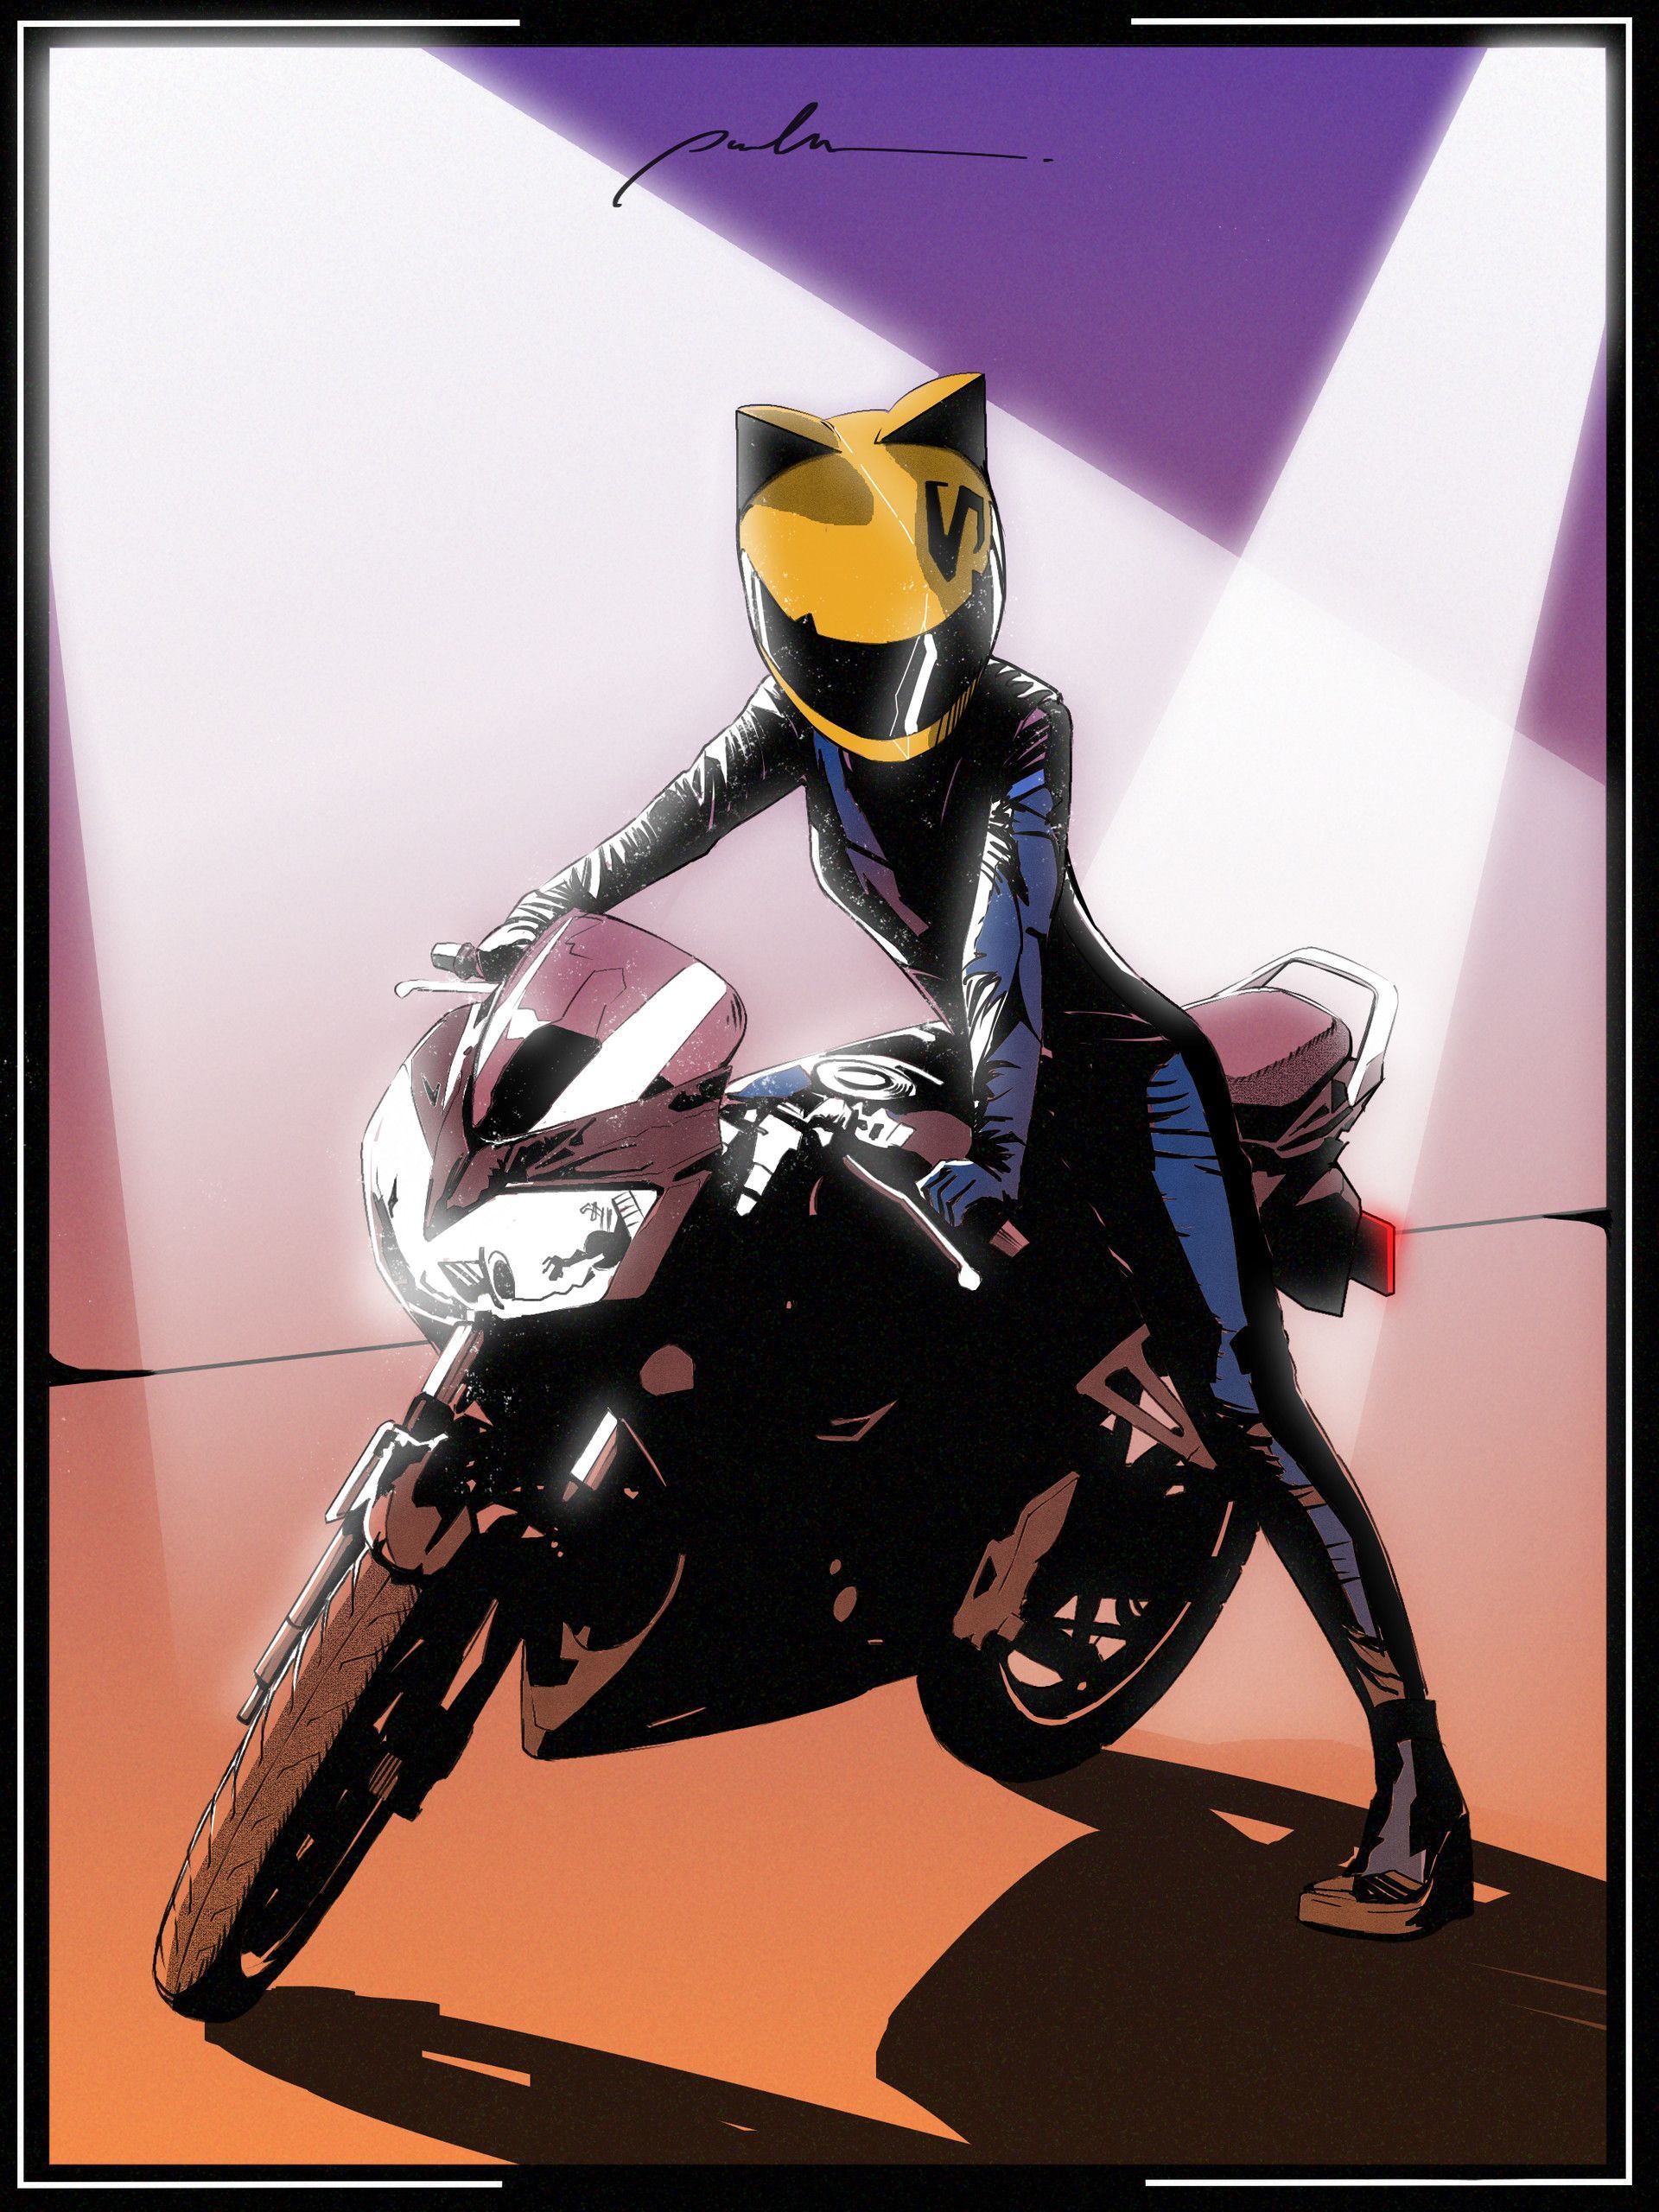 Amazon.com: SDFGH Anime Girl Motorcycle Poster Decorative Painting Canvas  Wall Art Living Room Posters Gifts Bedroom Painting 12x18inch(30x45cm):  Posters & Prints